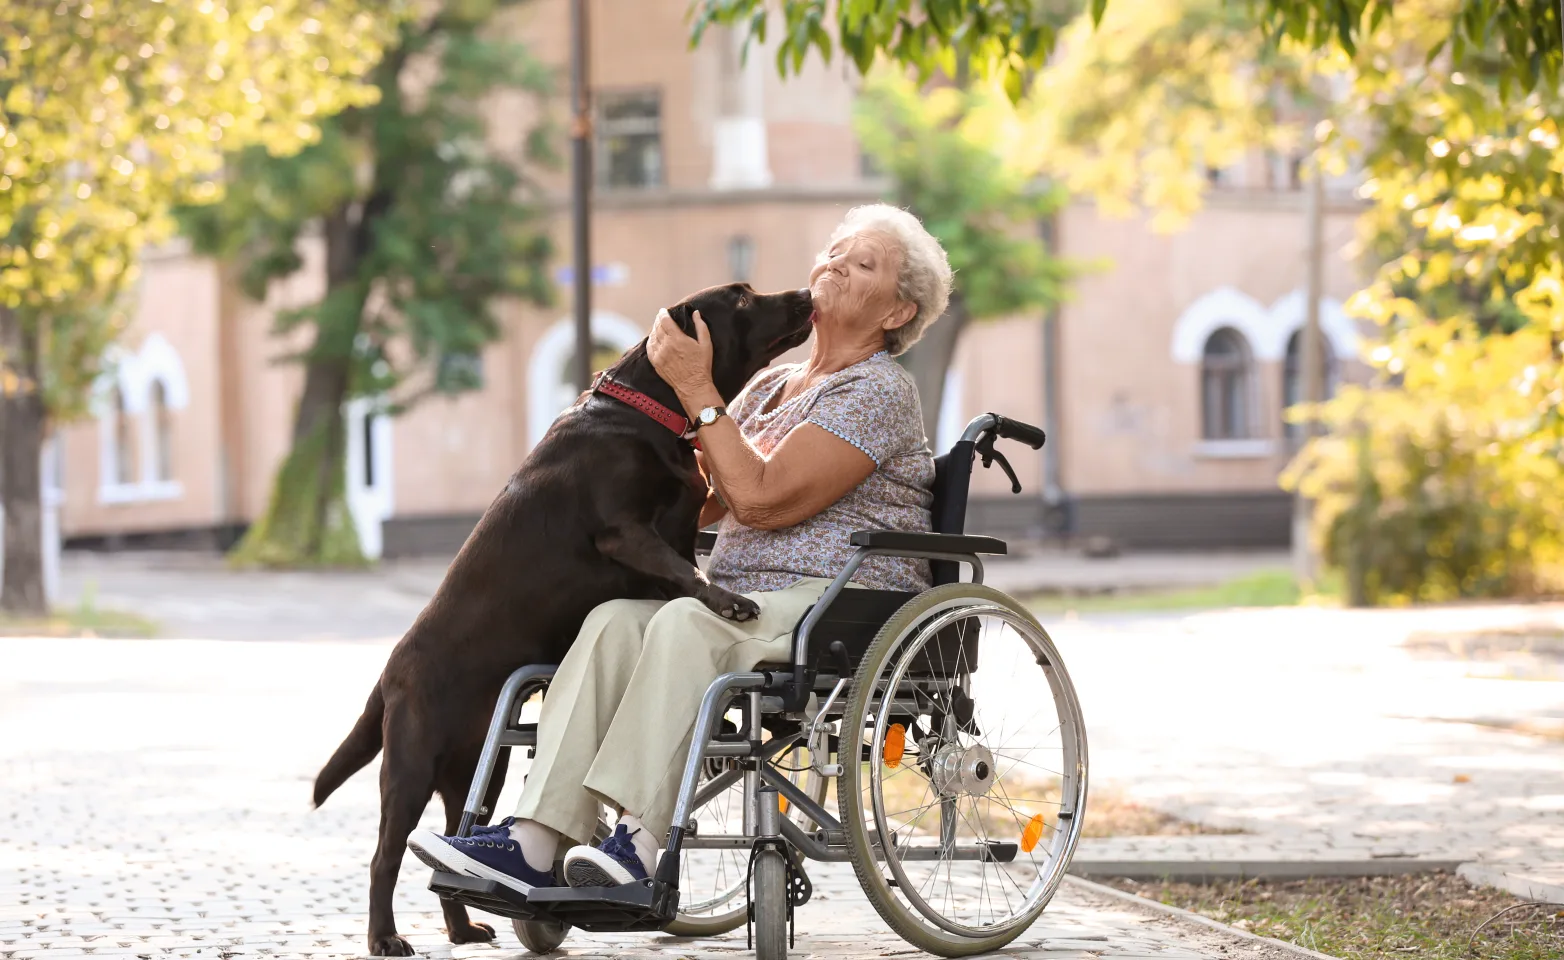 Old lady in a wheelchair petting a dog